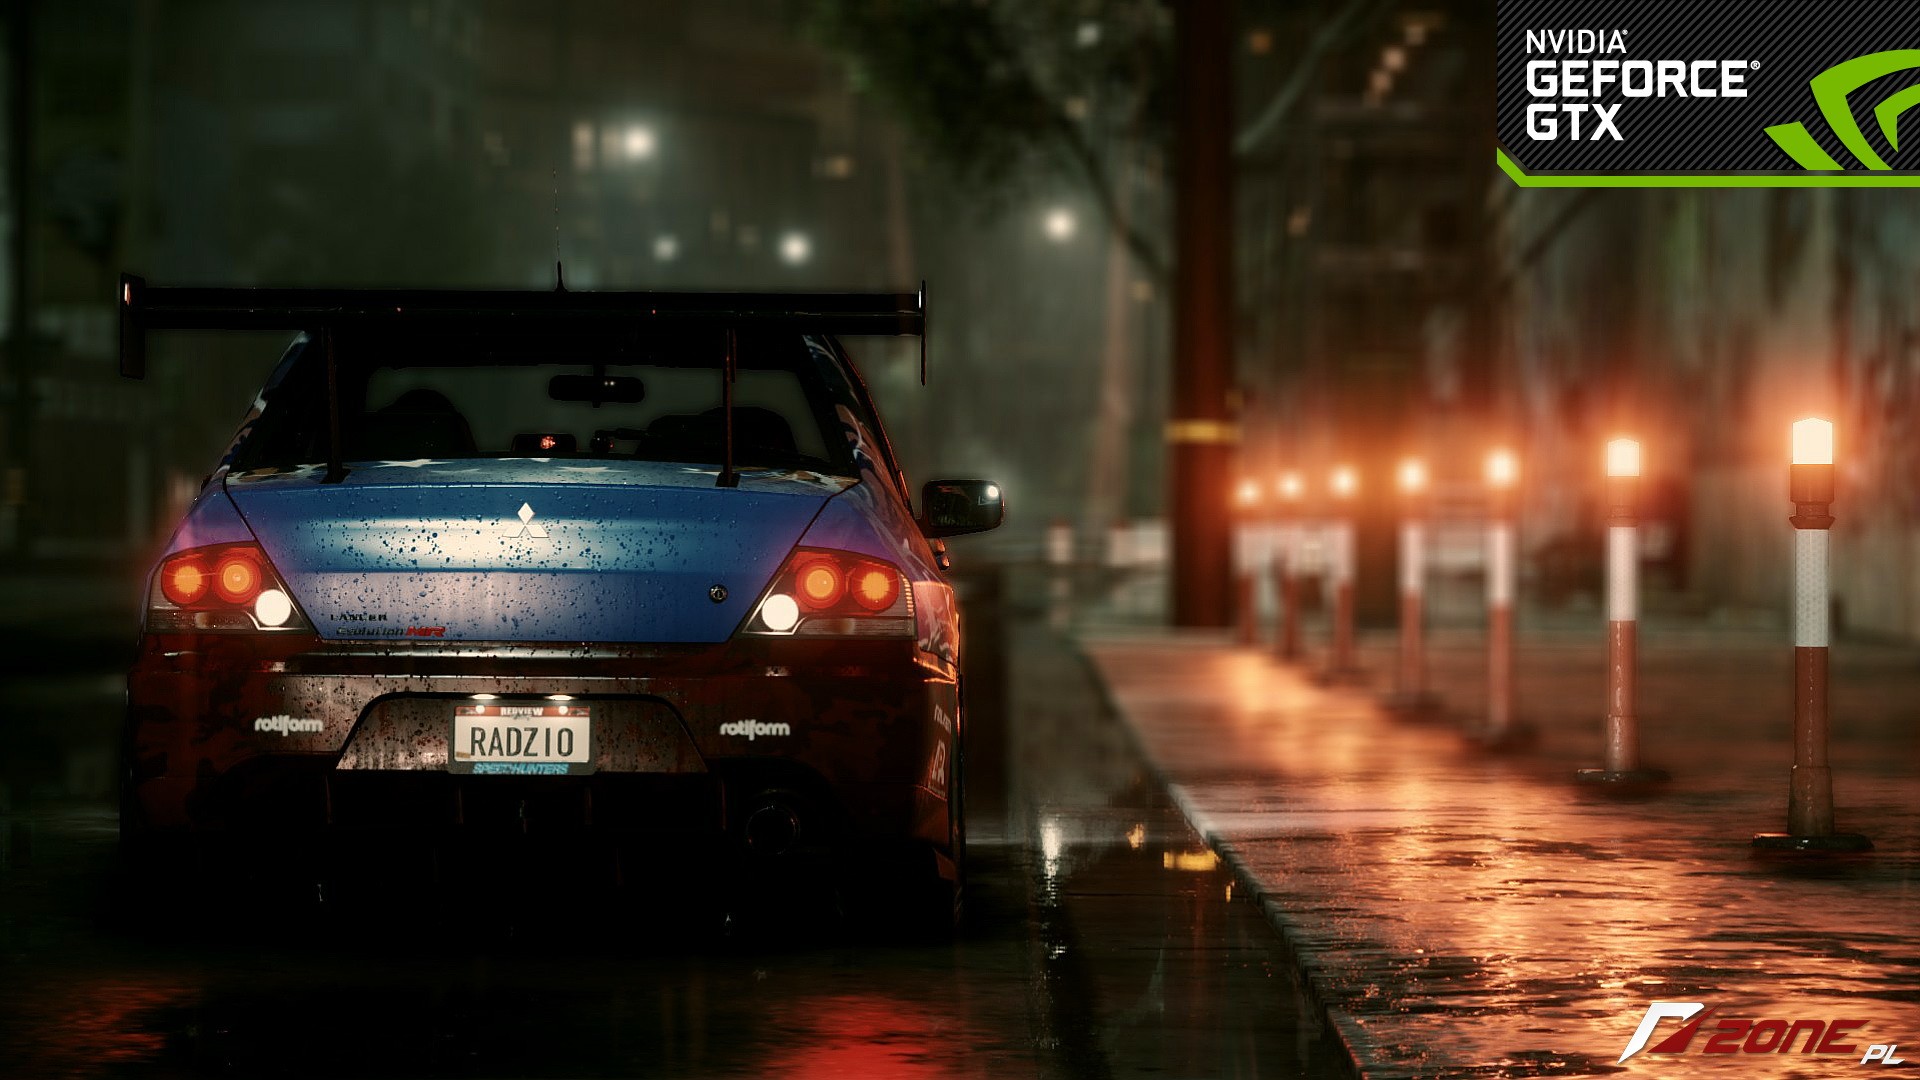 General 1920x1080 car night city video games Mitsubishi blue cars Nvidia PC gaming wet street Need for Speed taillights Japanese cars